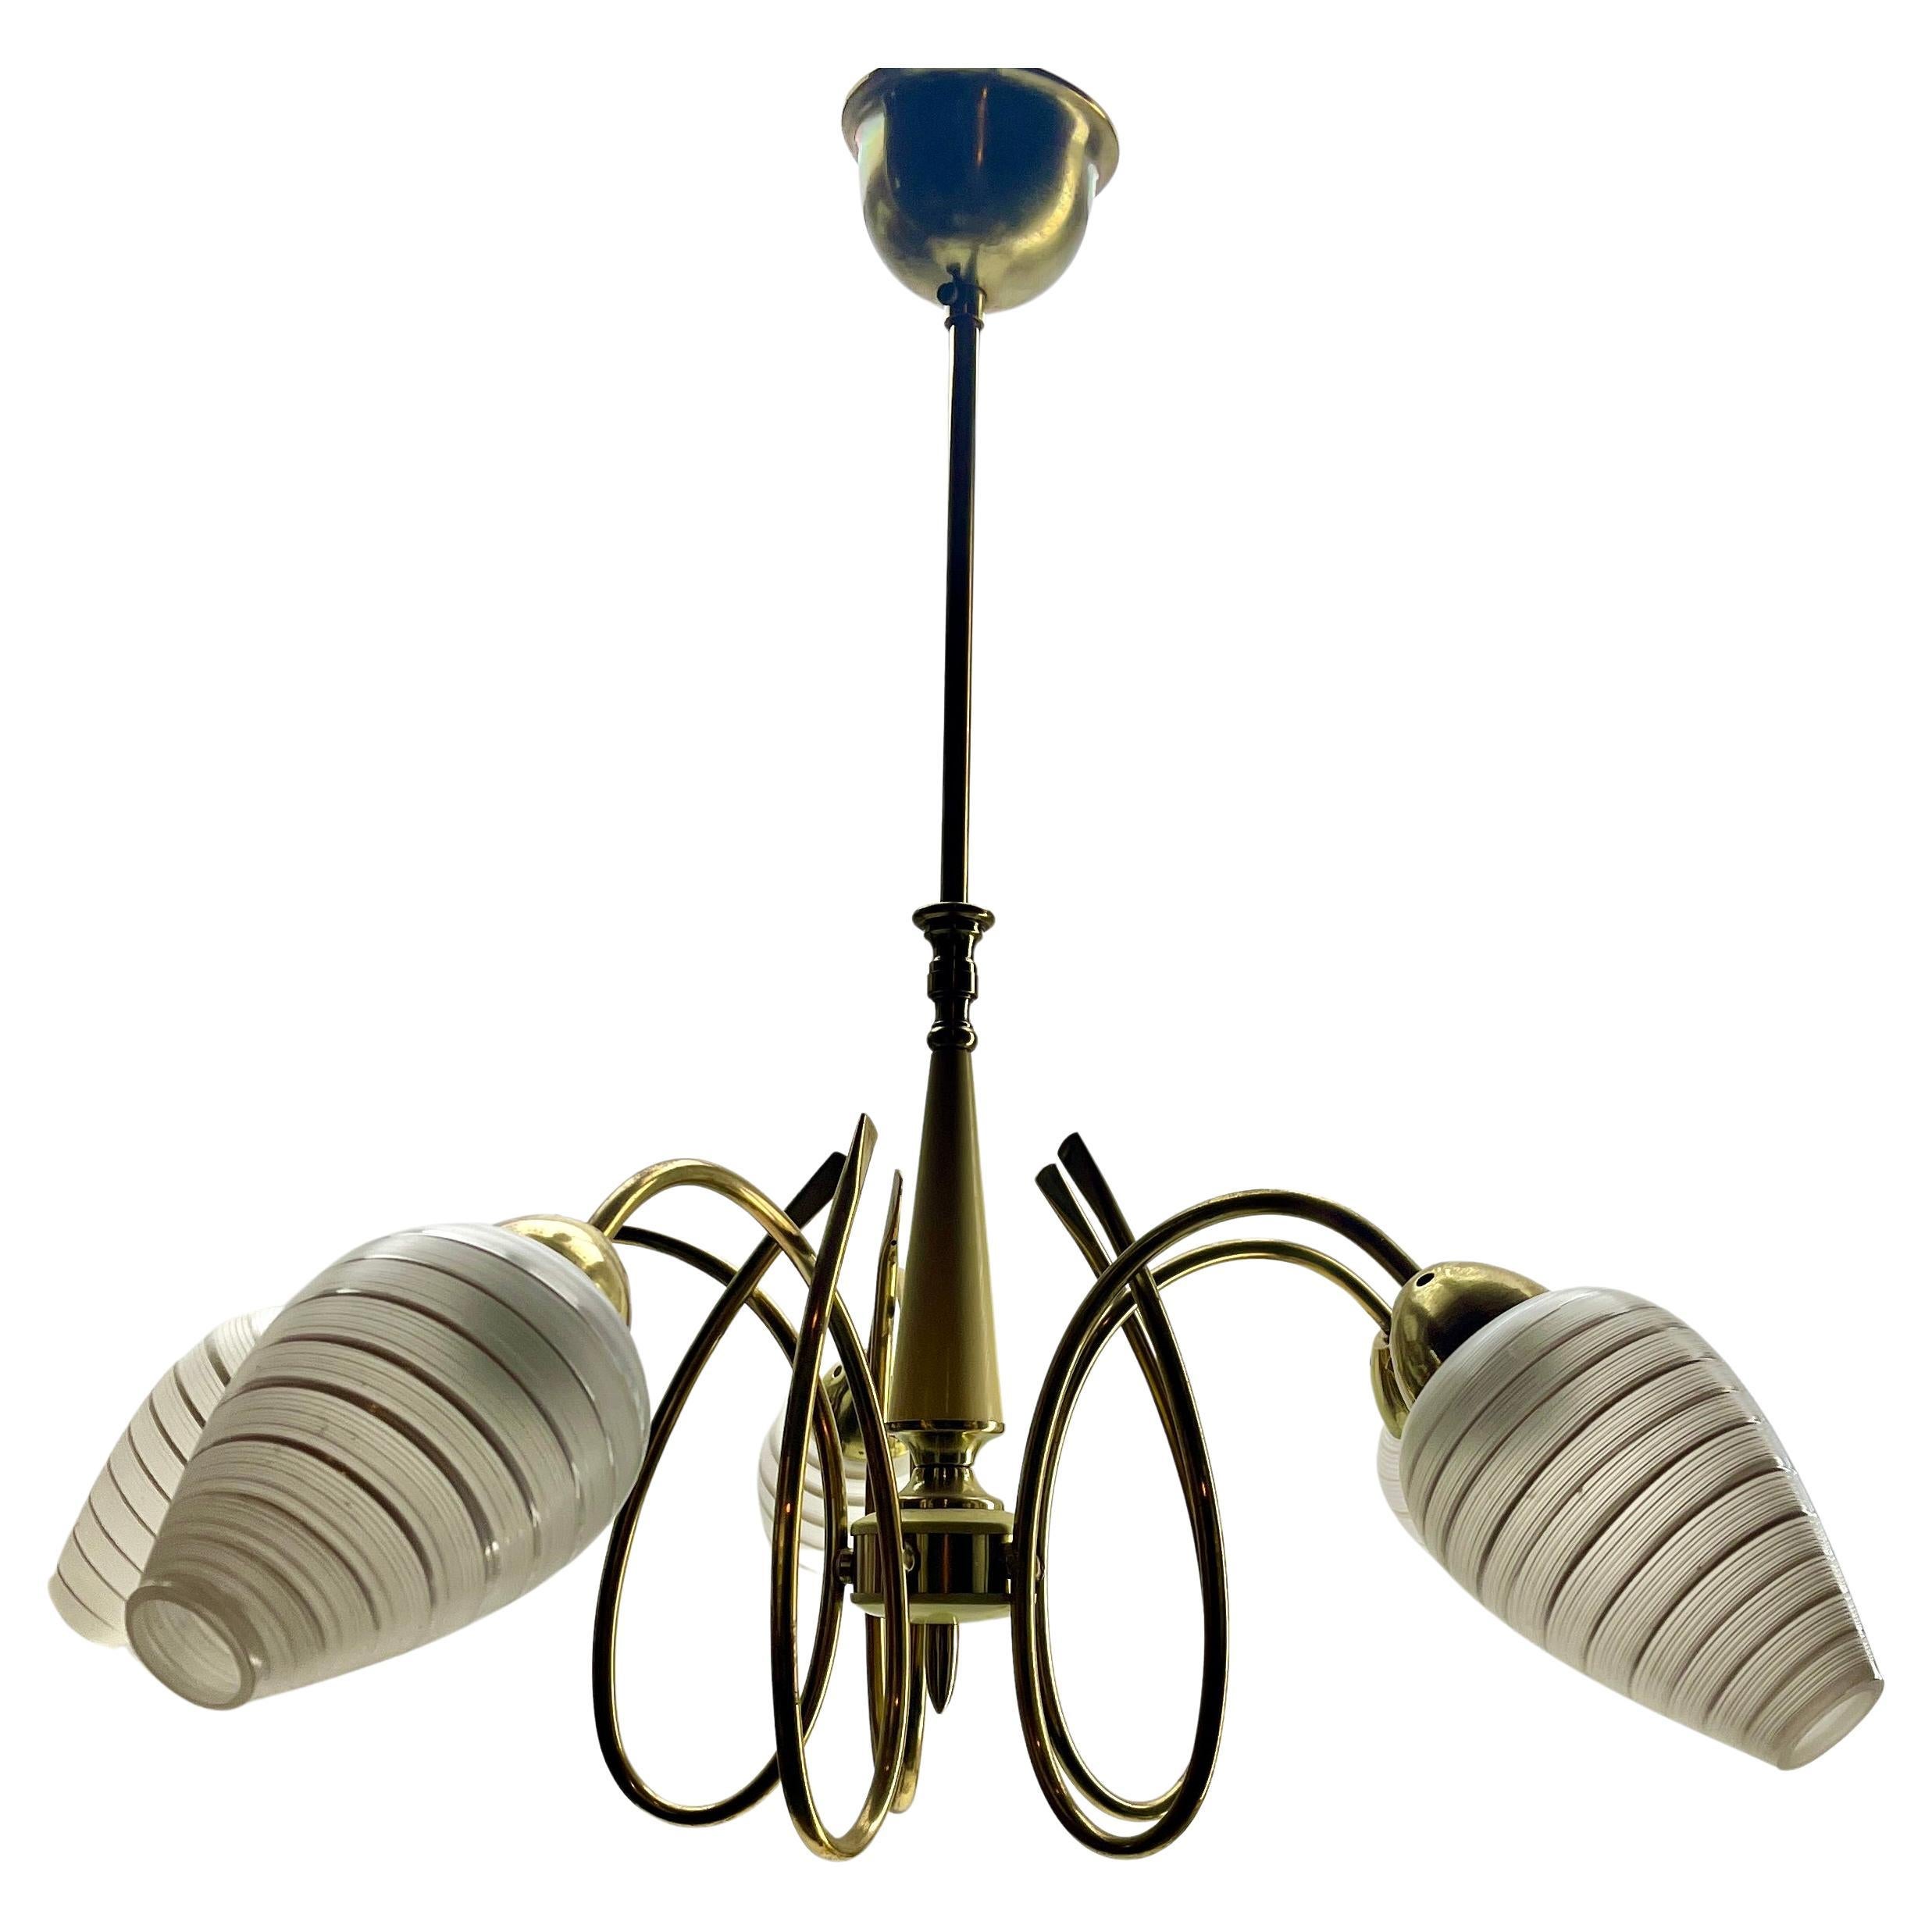 Machine-Made Vintage Chandelier in the Style of Stilnovo Five Arms Italian, 1960s For Sale